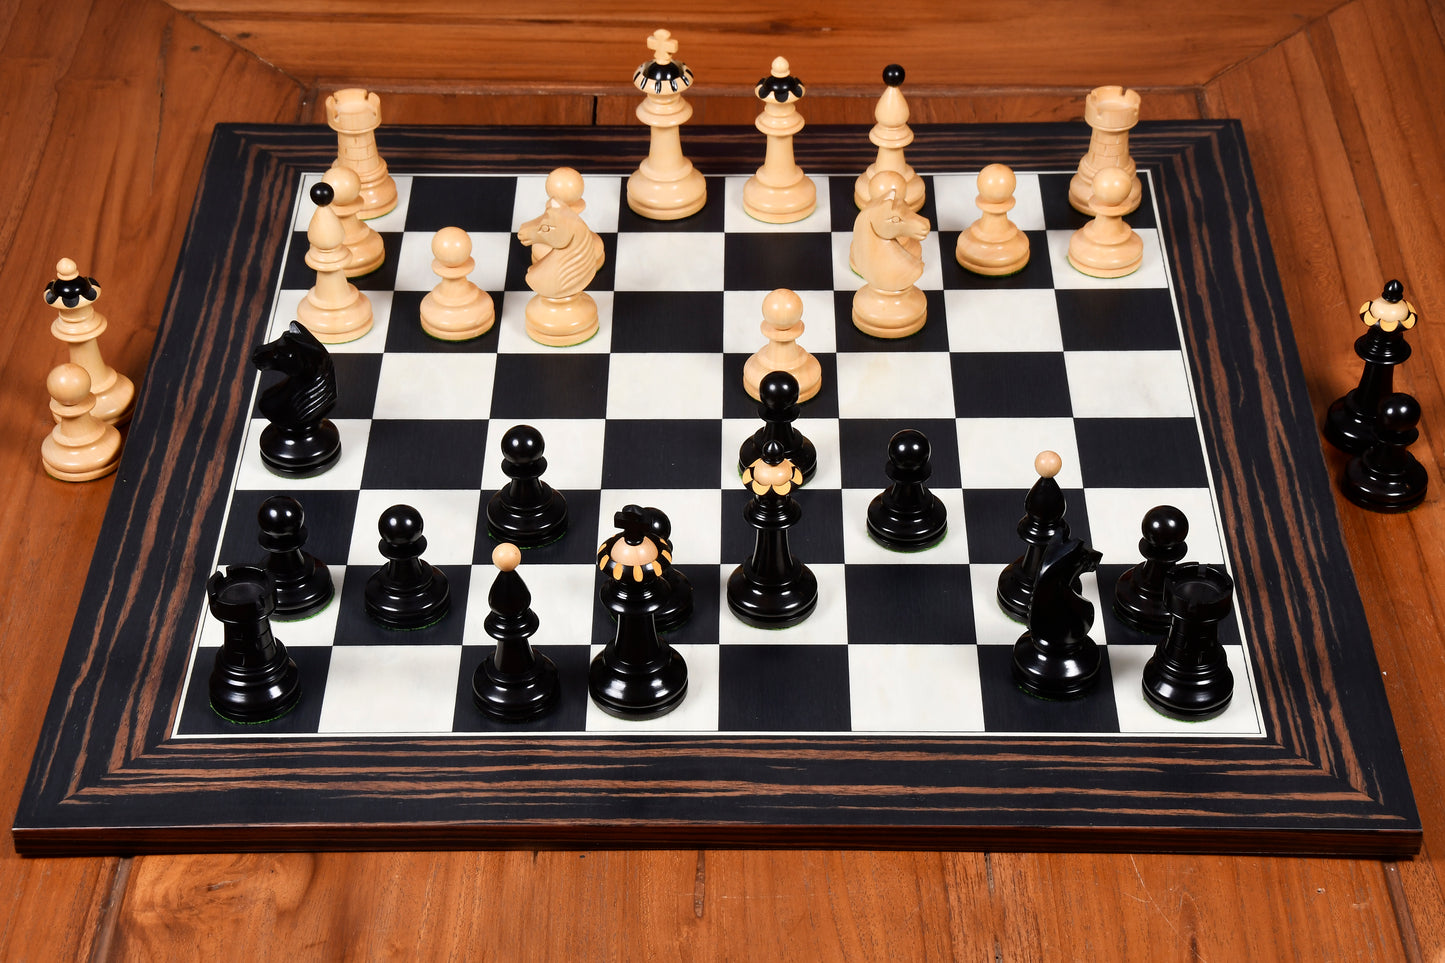 The 1935 Warsaw Capablanca Simultaneous Chess Set Reproduction in Ebony and Boxwood - 3.8" King